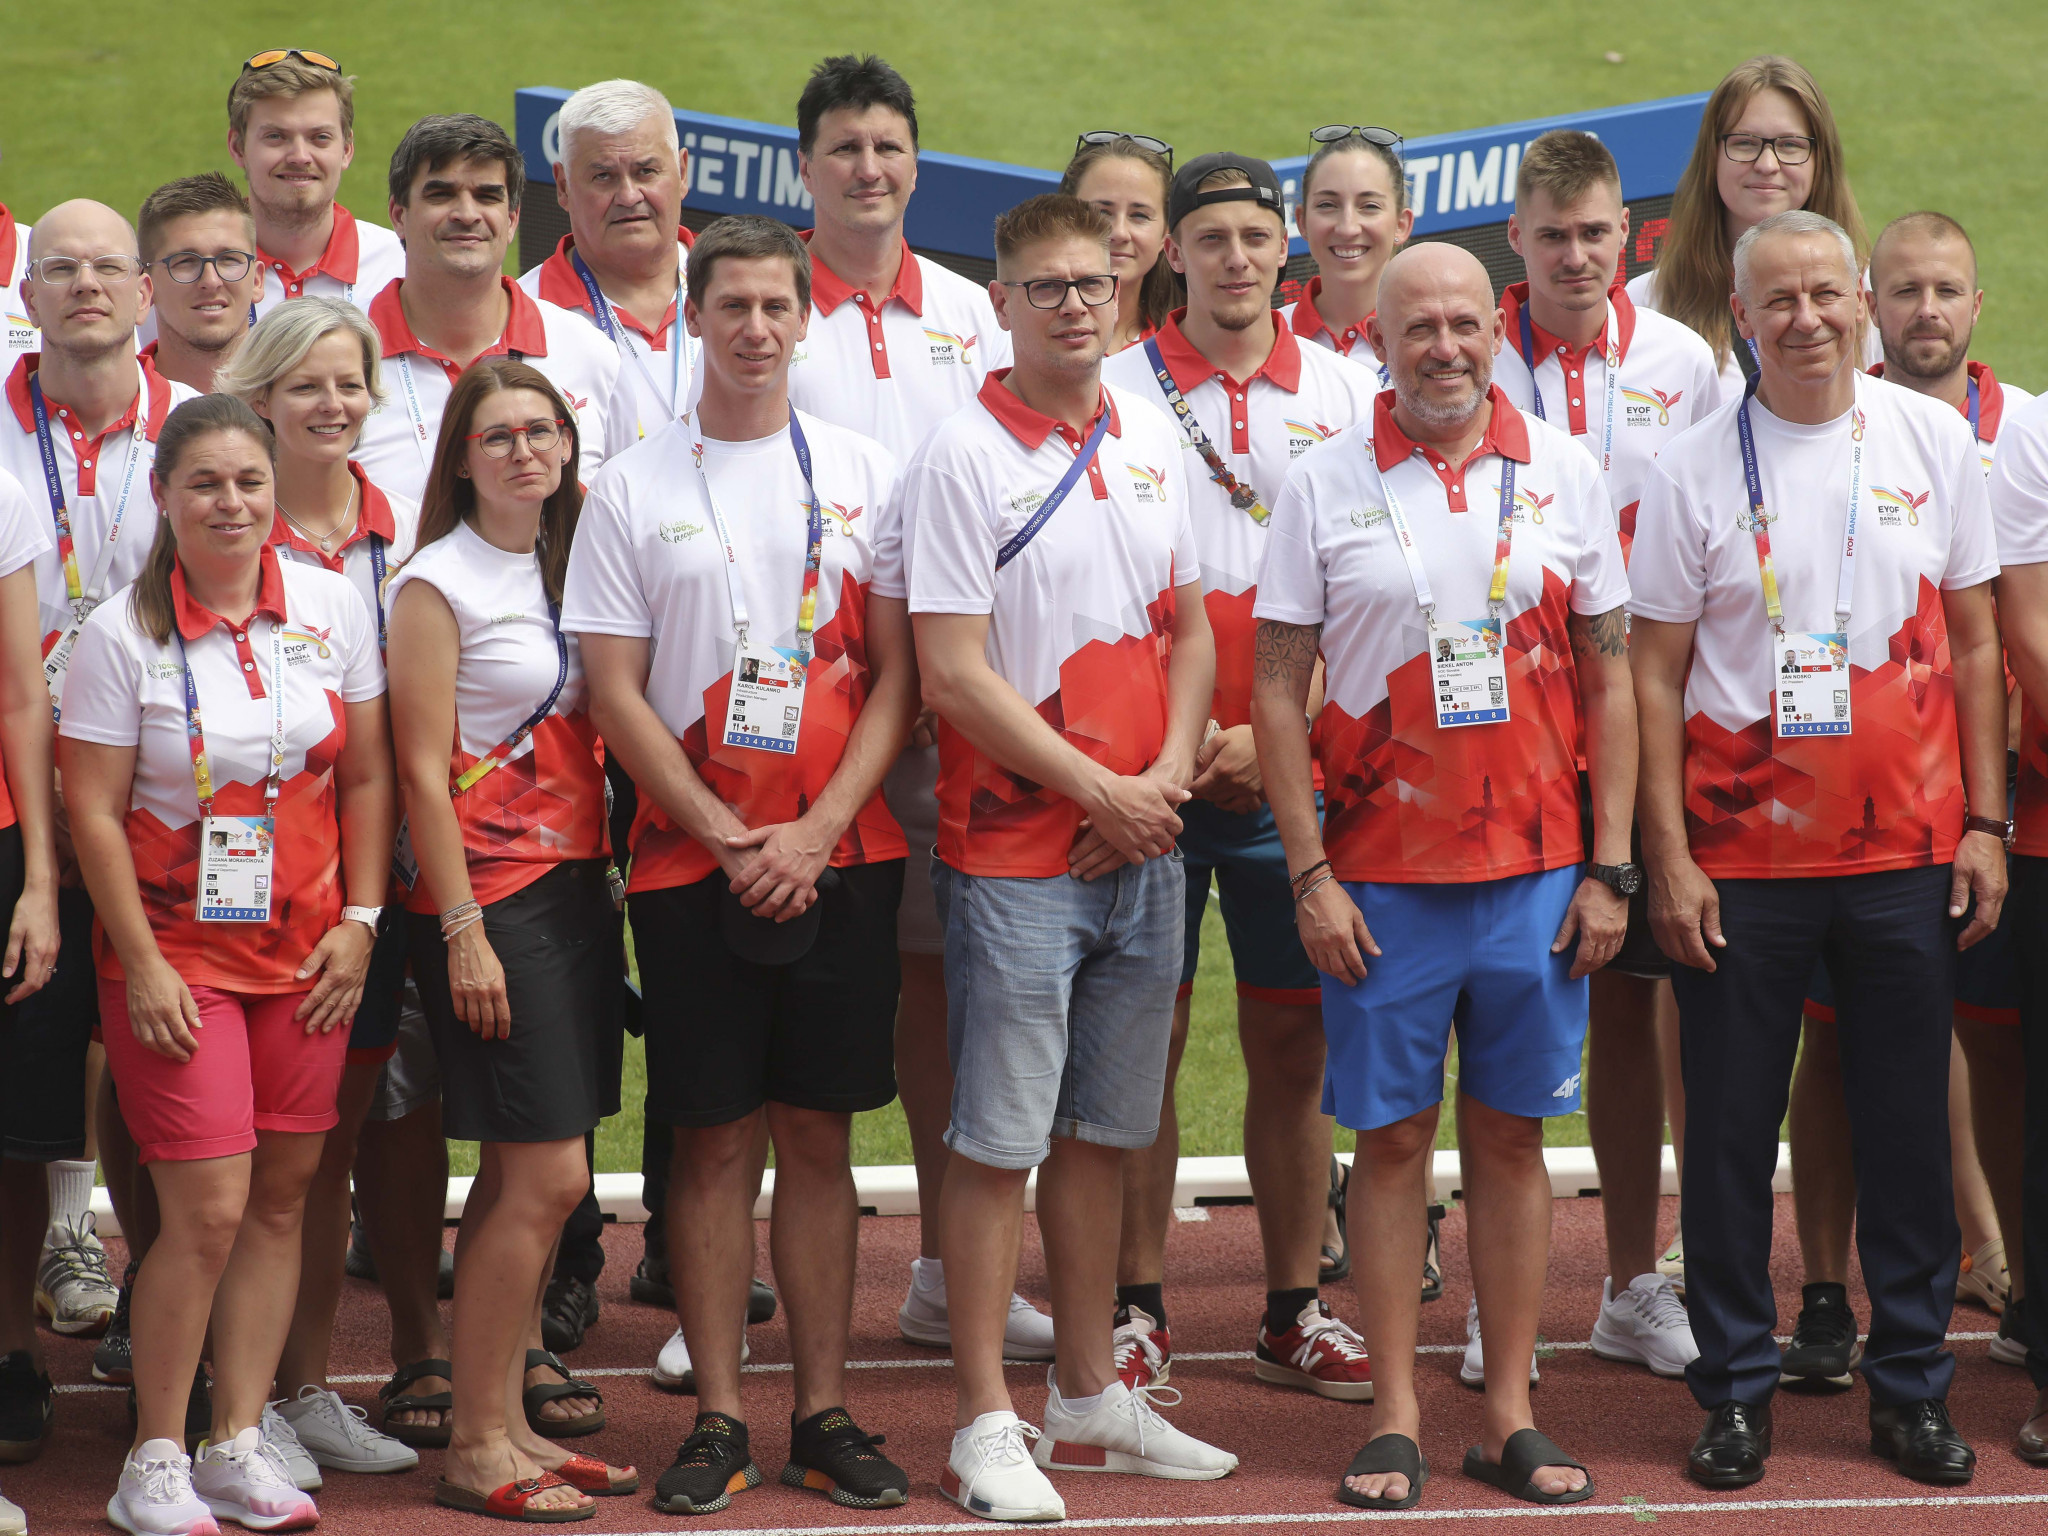 Anton Siekel, front second from right, was at the Banská Bystrica EYOF as his country hosted the event ©EYOF Banská Bystrica 2022